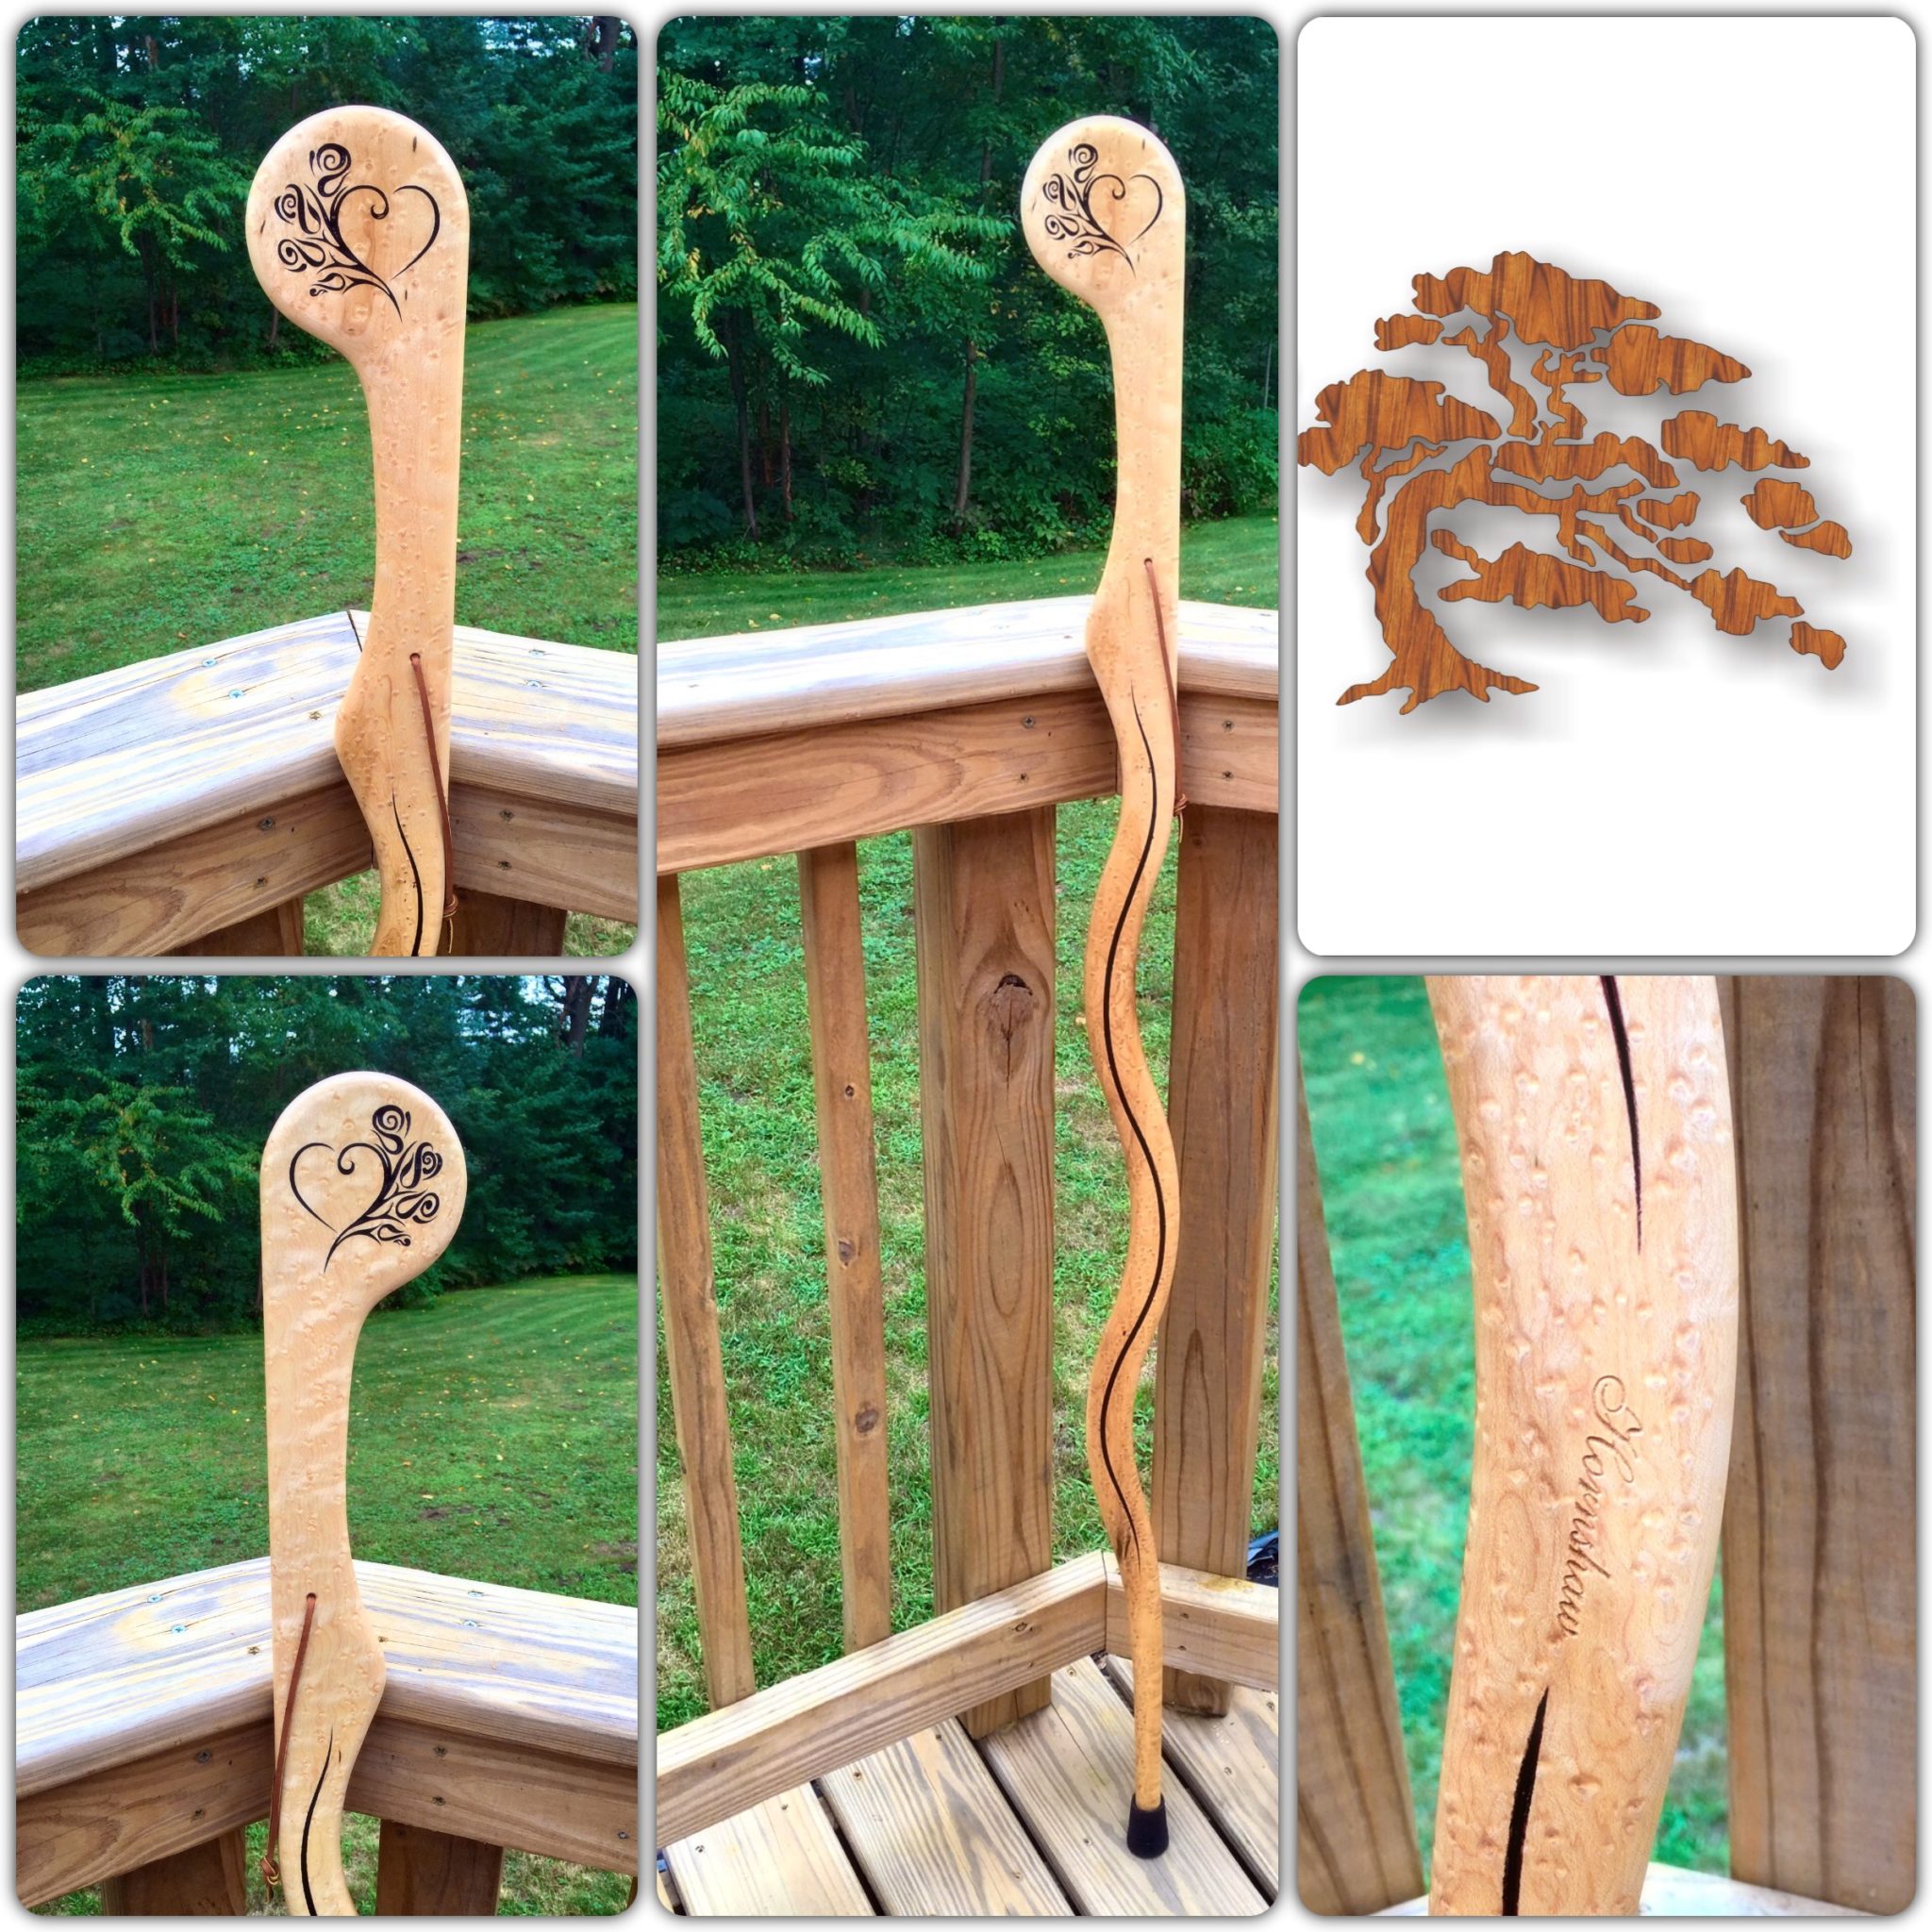 Cane Topper Woodcarving